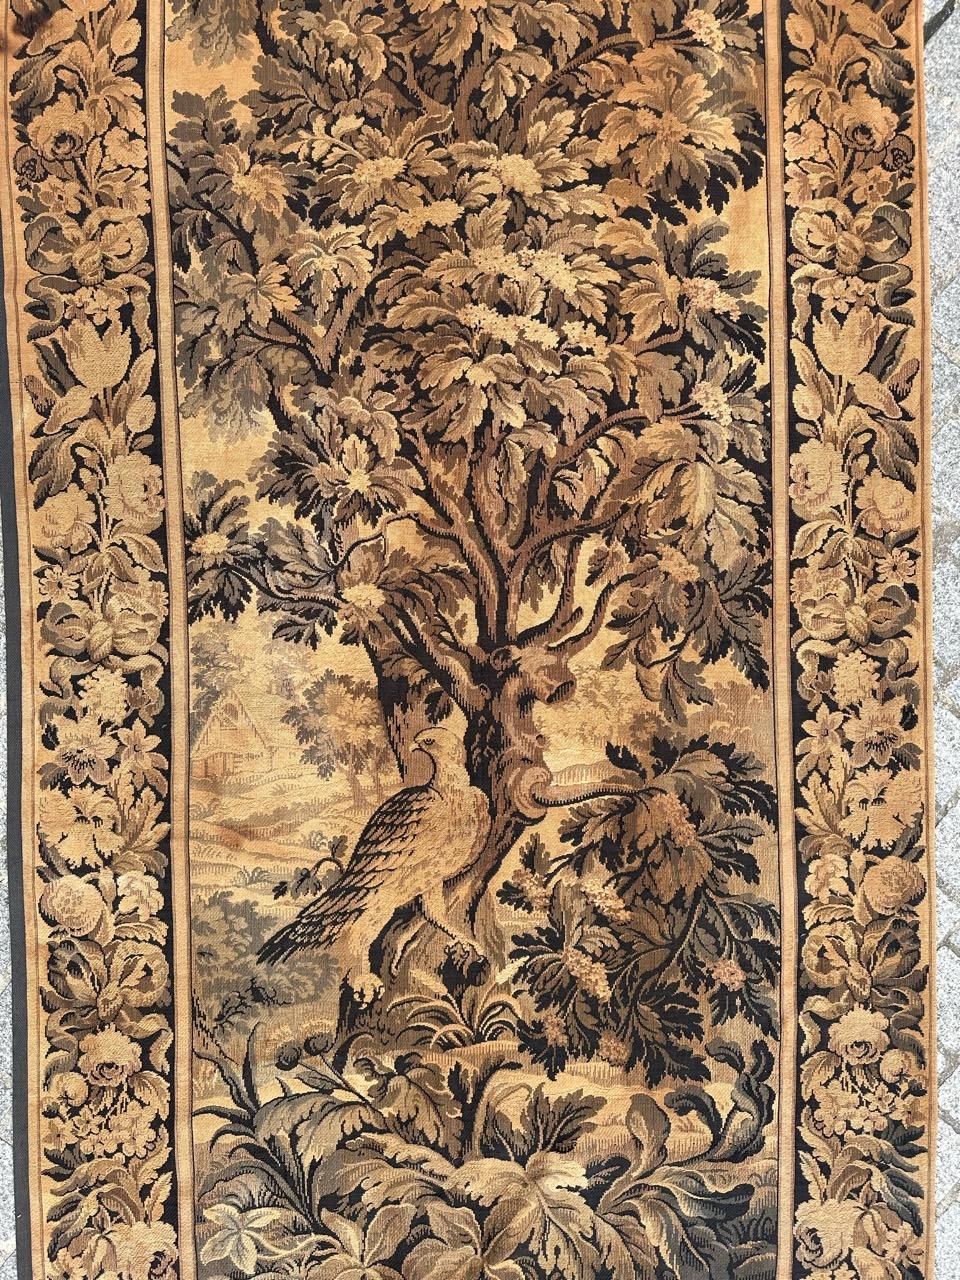 Very pretty antique french Aubusson style tapestry with beautiful design from the nature with an eagle. Woven on Jacquard loom with wool and cotton.
✨✨✨
